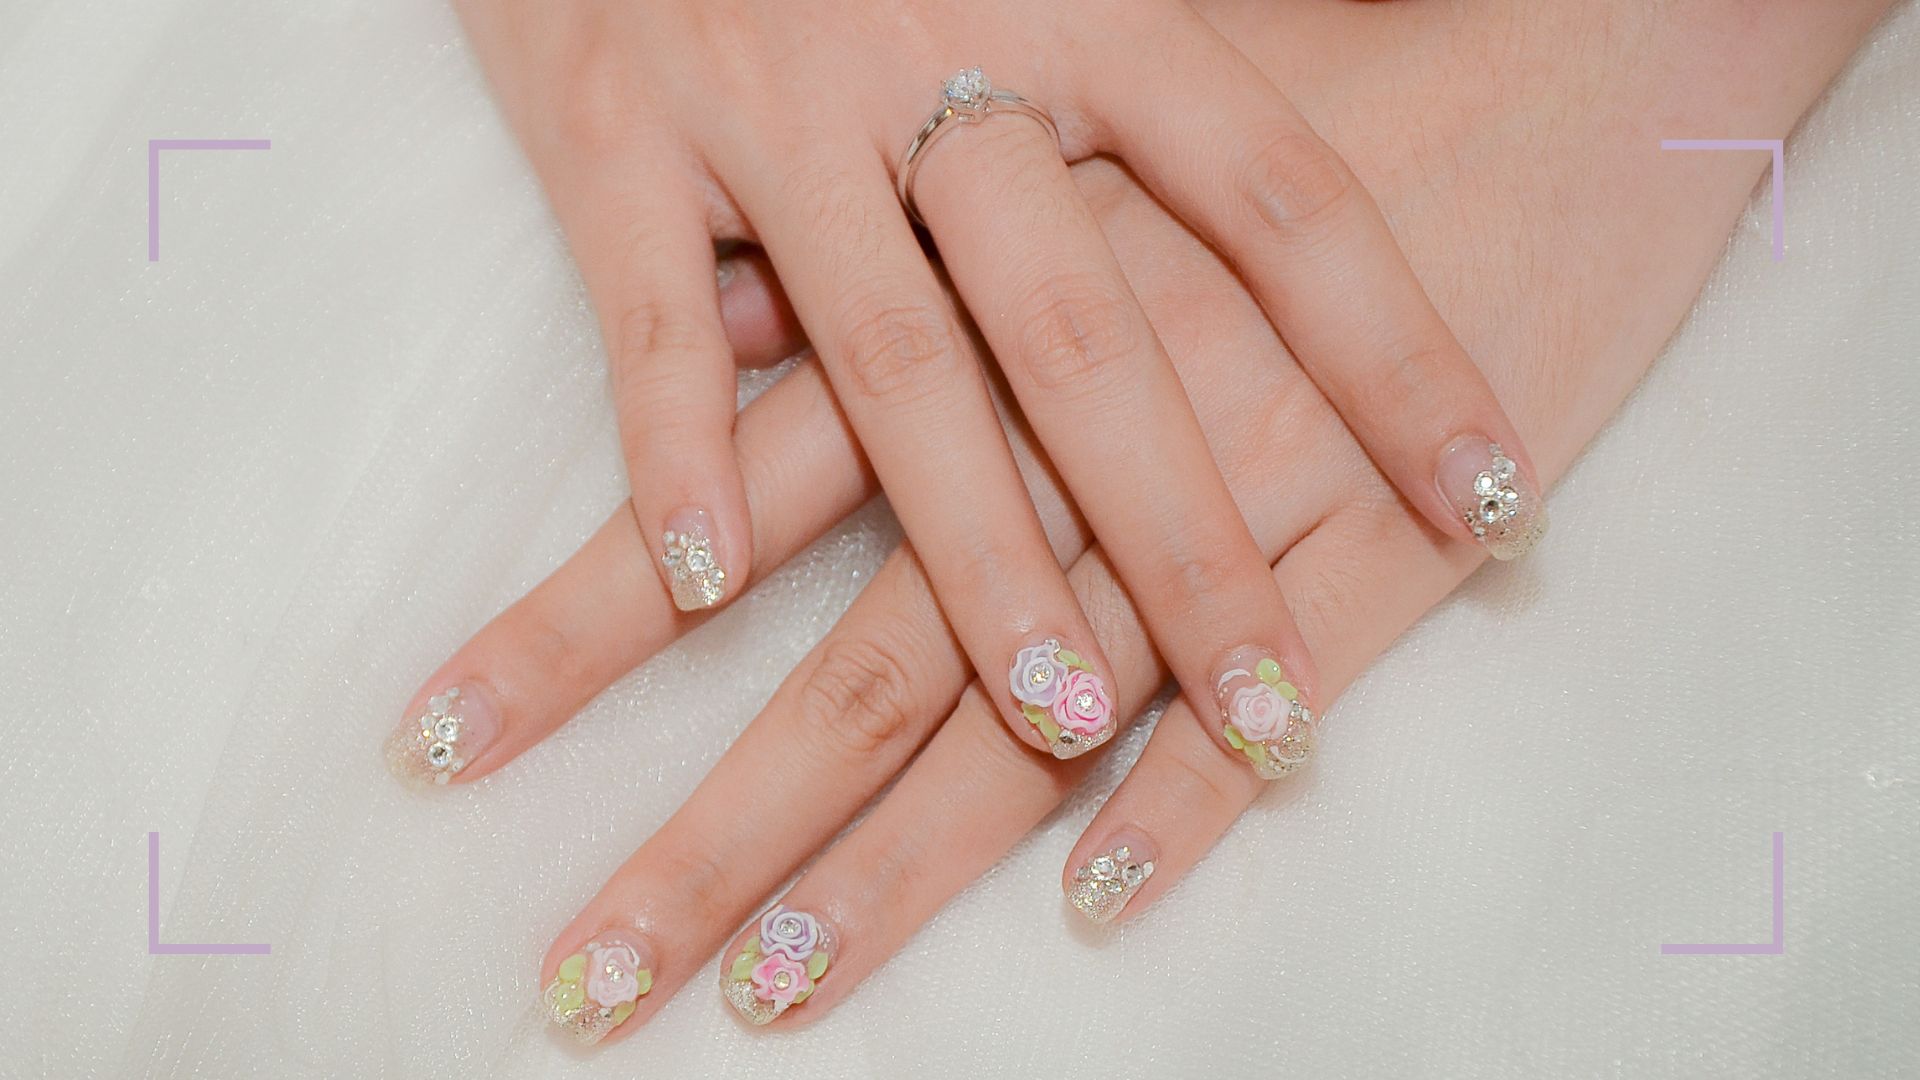 10 Nail Trends to Try on Your Wedding Day - The New York Times